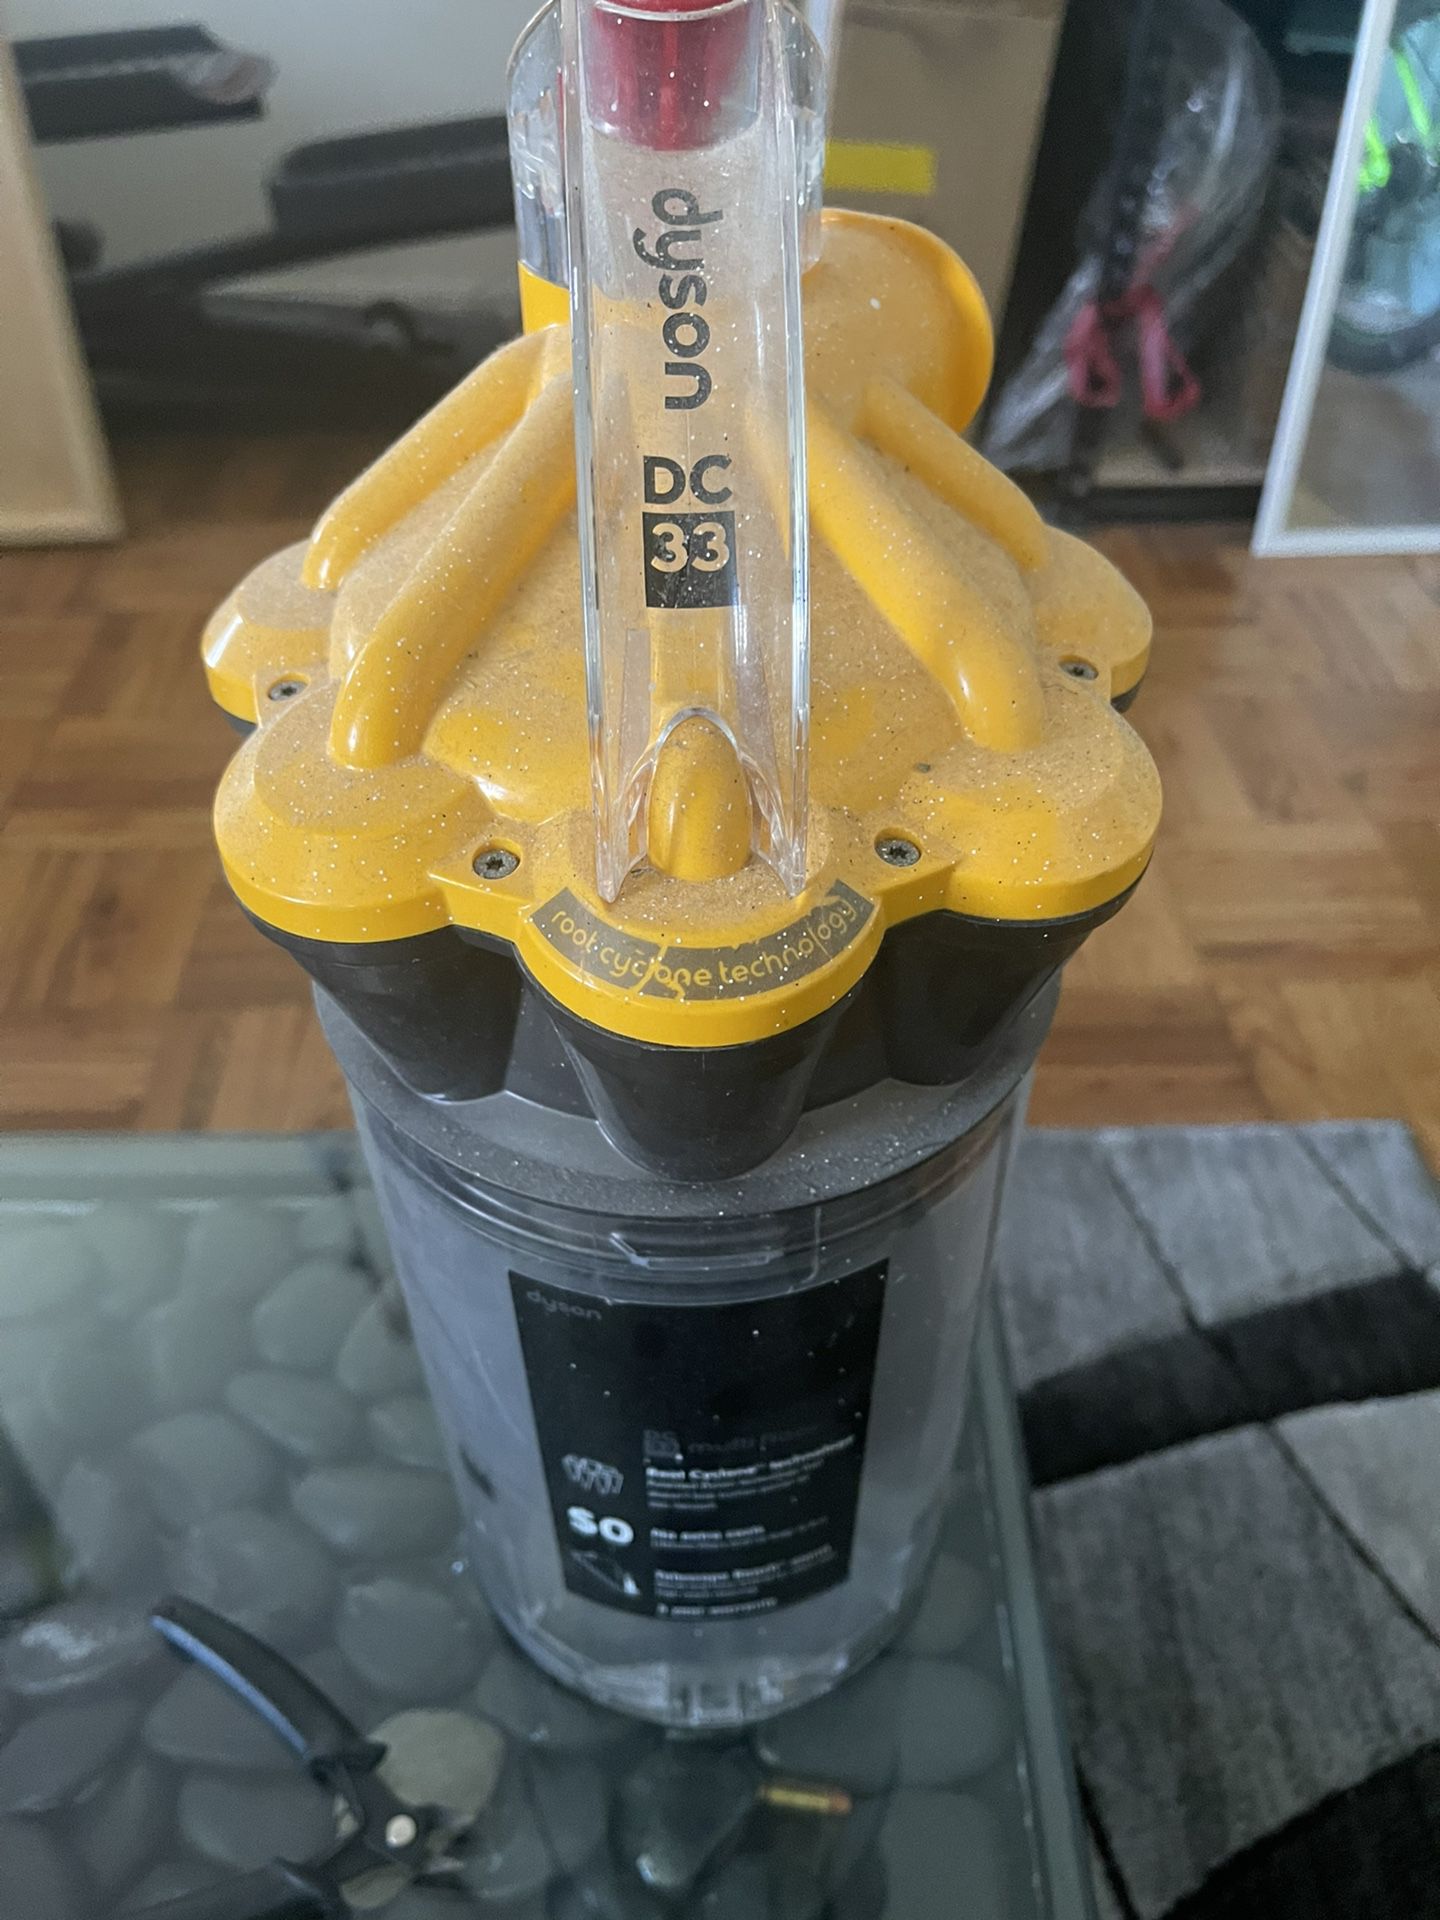 Dyson Dc33 Cyclone Dust Bin. Port Chester Ny 10573  Pick Up Only 